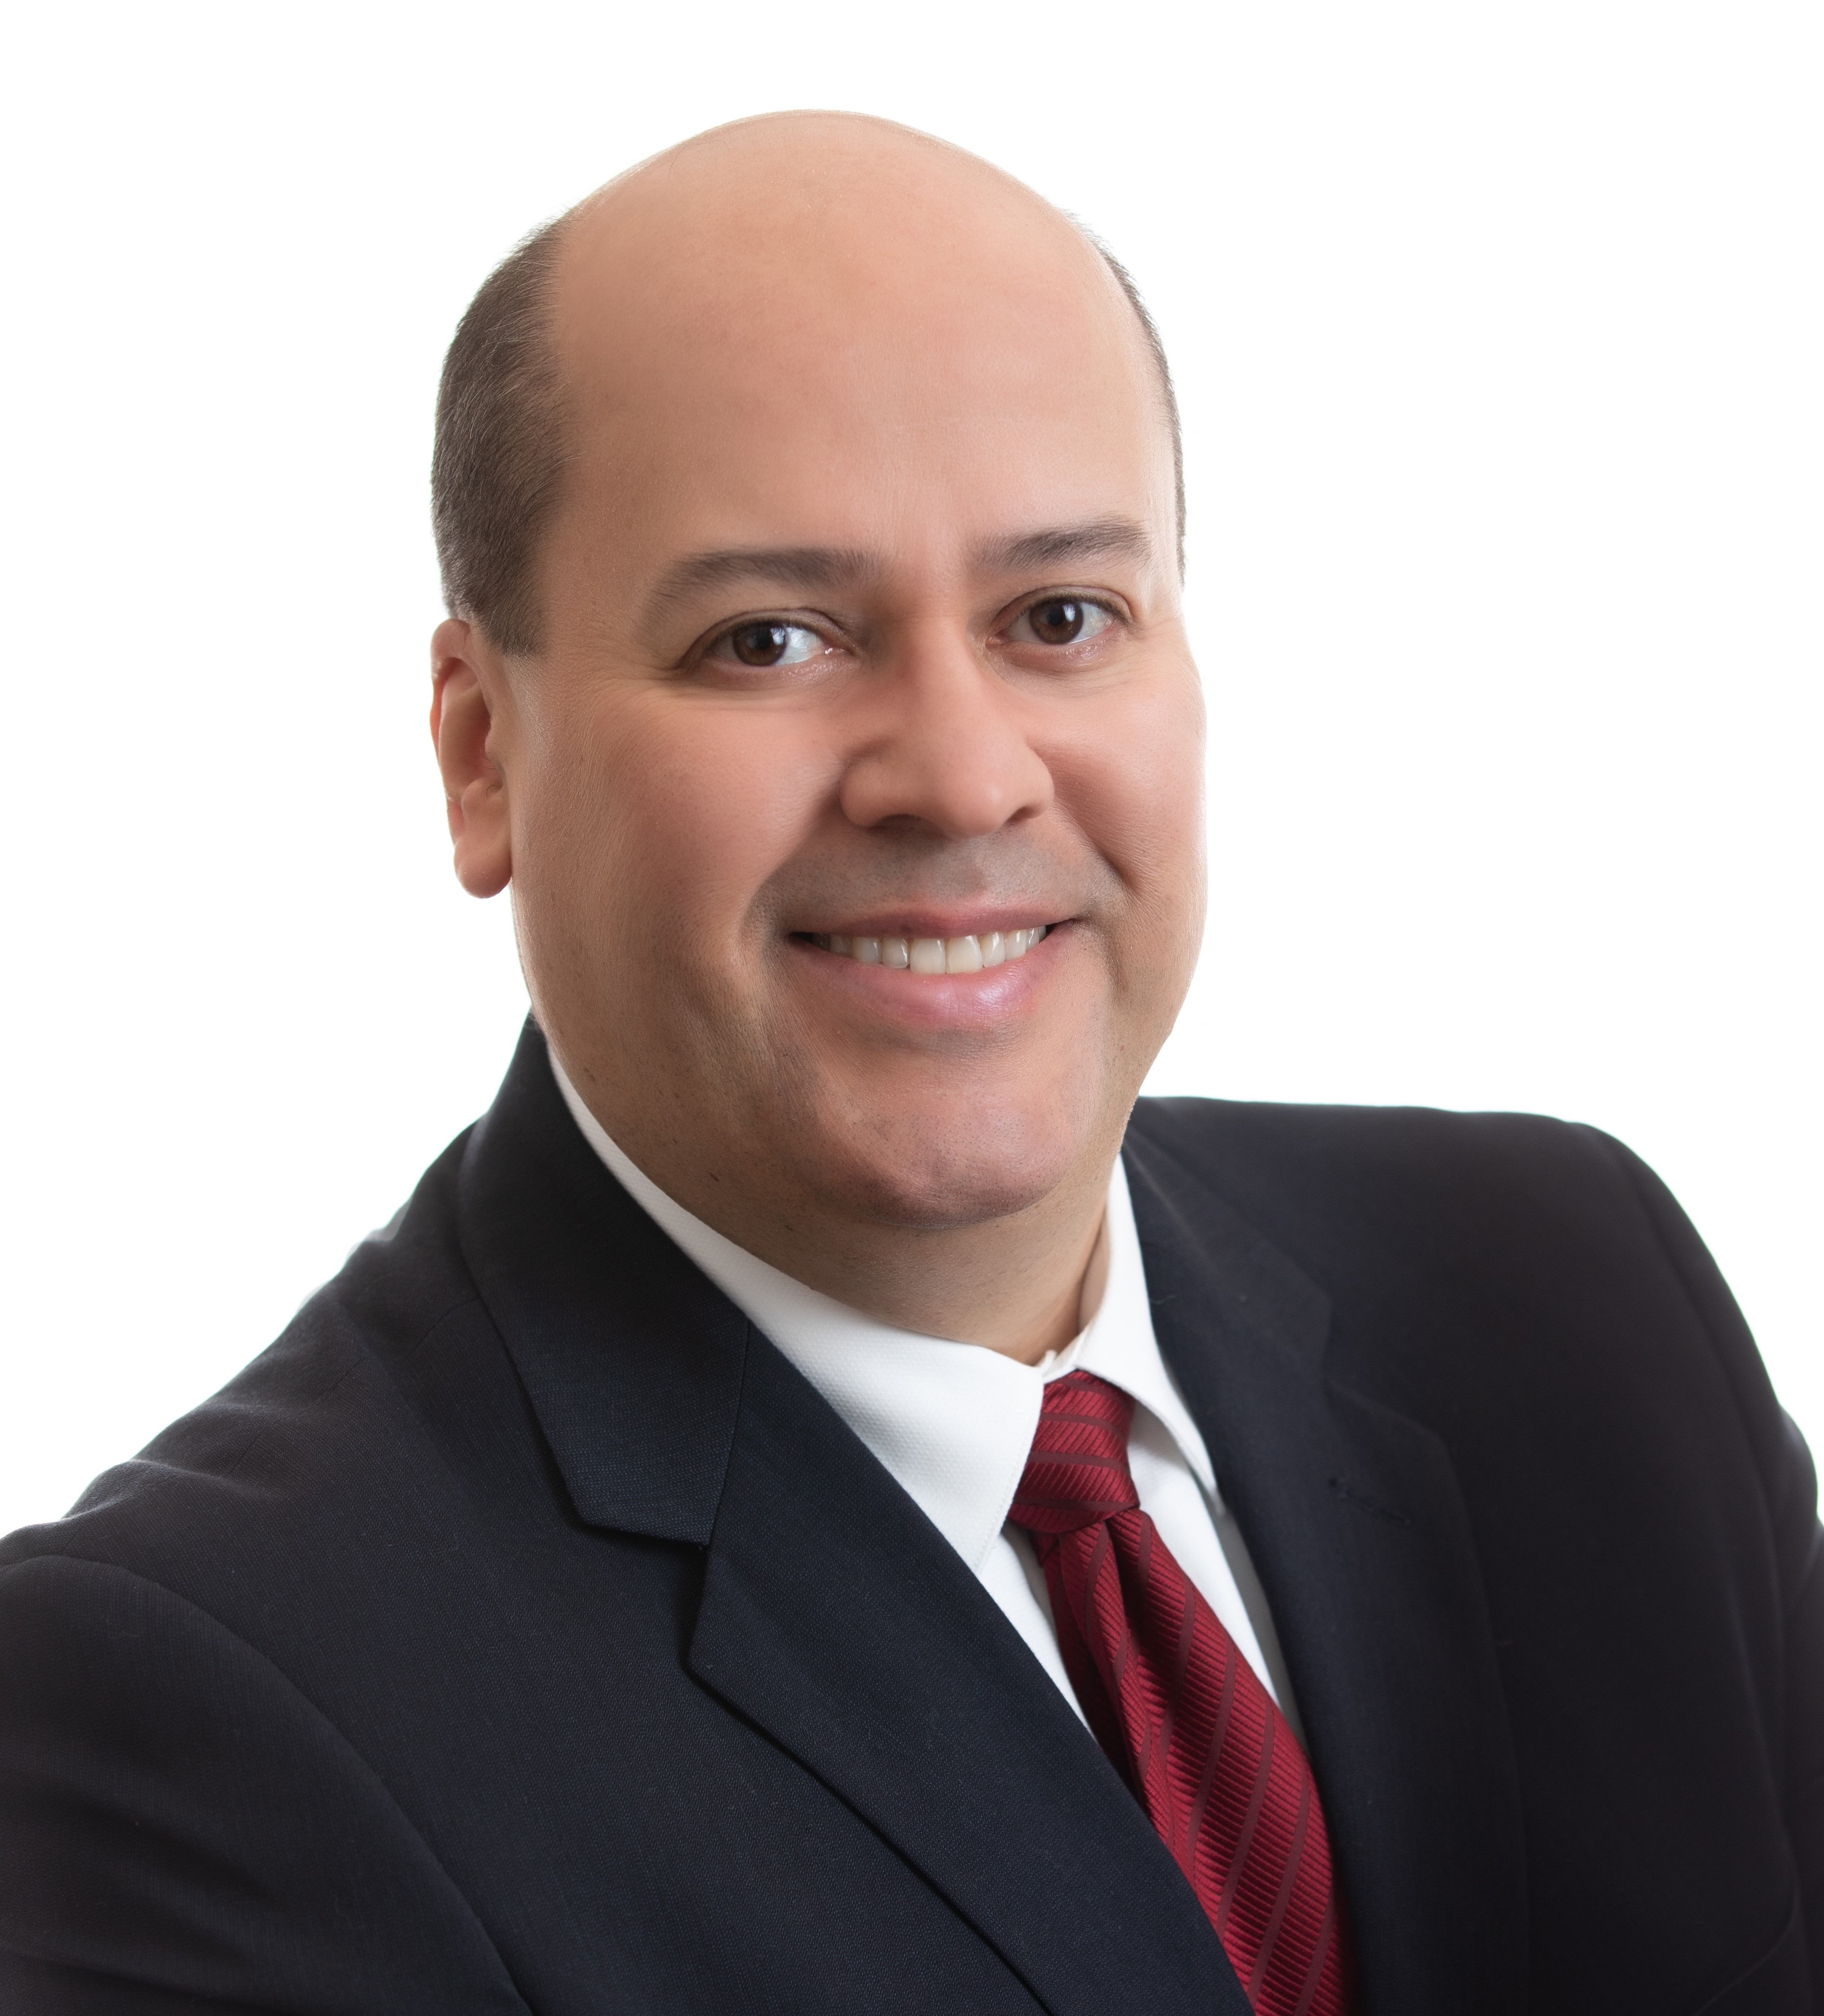 Headshot of Dr. Isaac Rodriguez-Chavez, Ph.D., MHS, MS. He has been appointed Senior Vice President, Scientific and Clinical Affairs, at PRA Health Sciences. Dr. Rodriguez-Chavez will lead PRA's Global Center of Excellence for Decentralized Clinical Research Strategy.